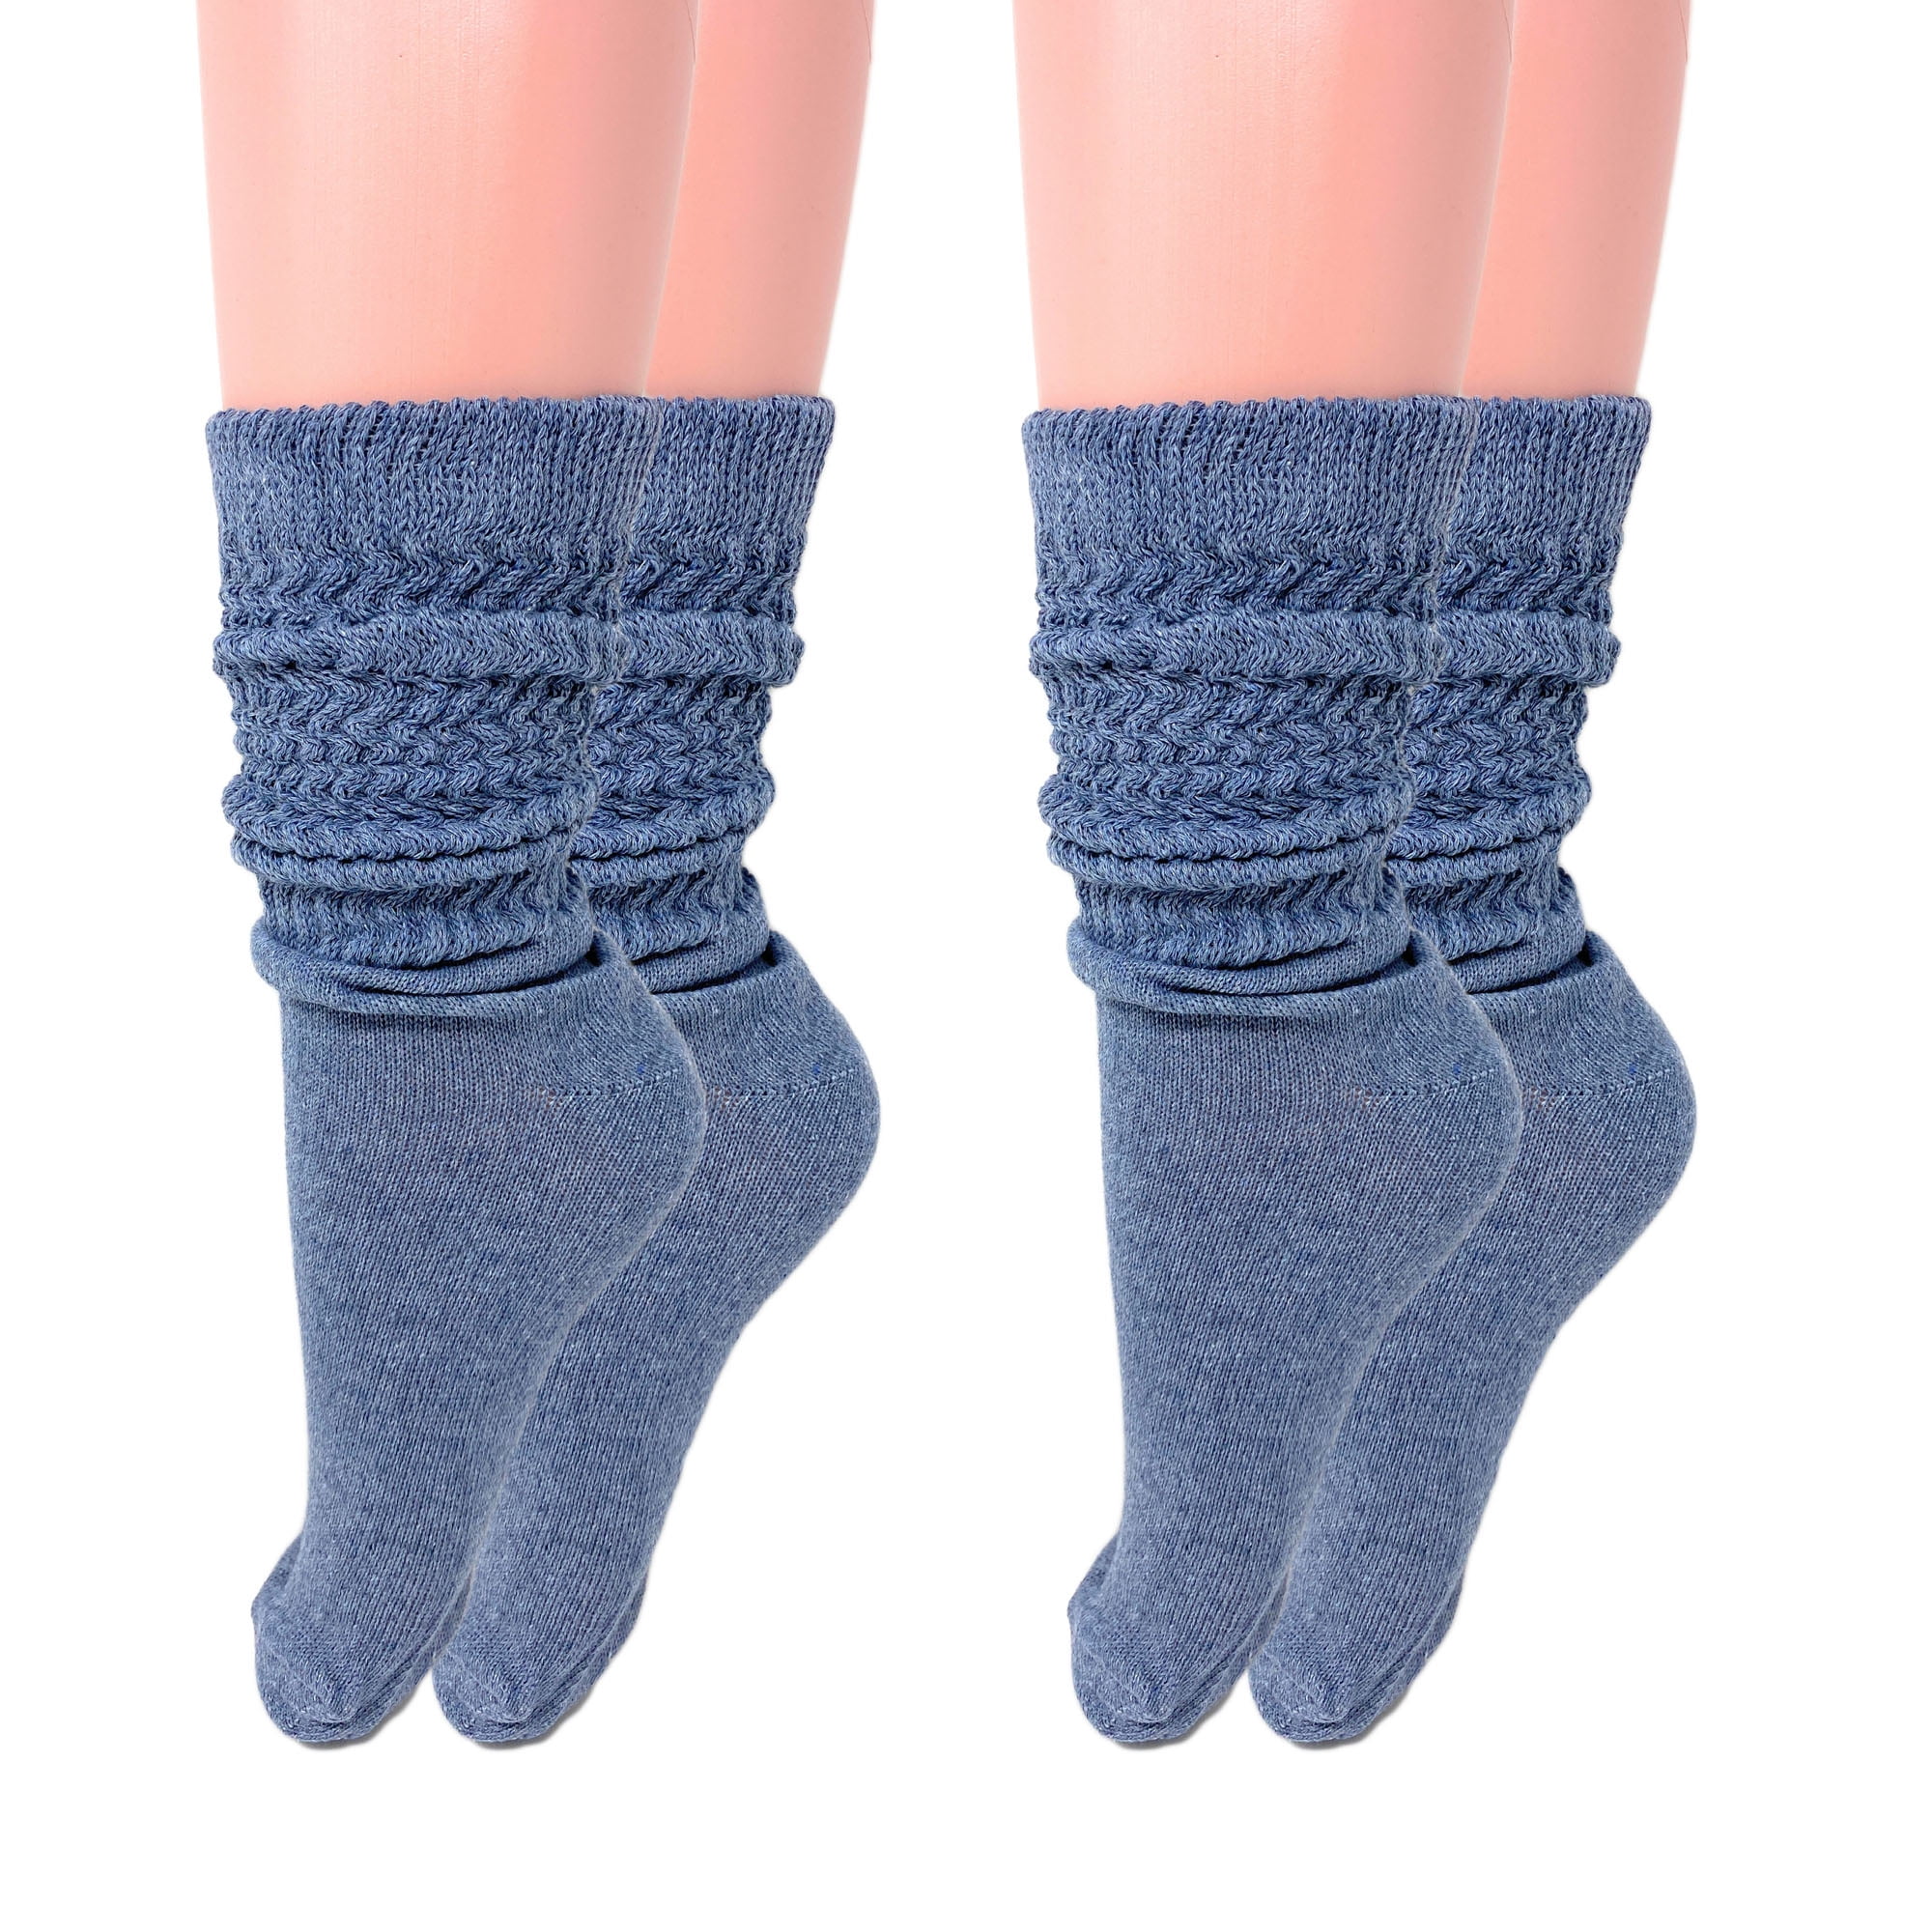 S1 or 3 Pairs Assorted Women 2.3 TOG Thermal Winter Warm Slipper Socks with Grip 